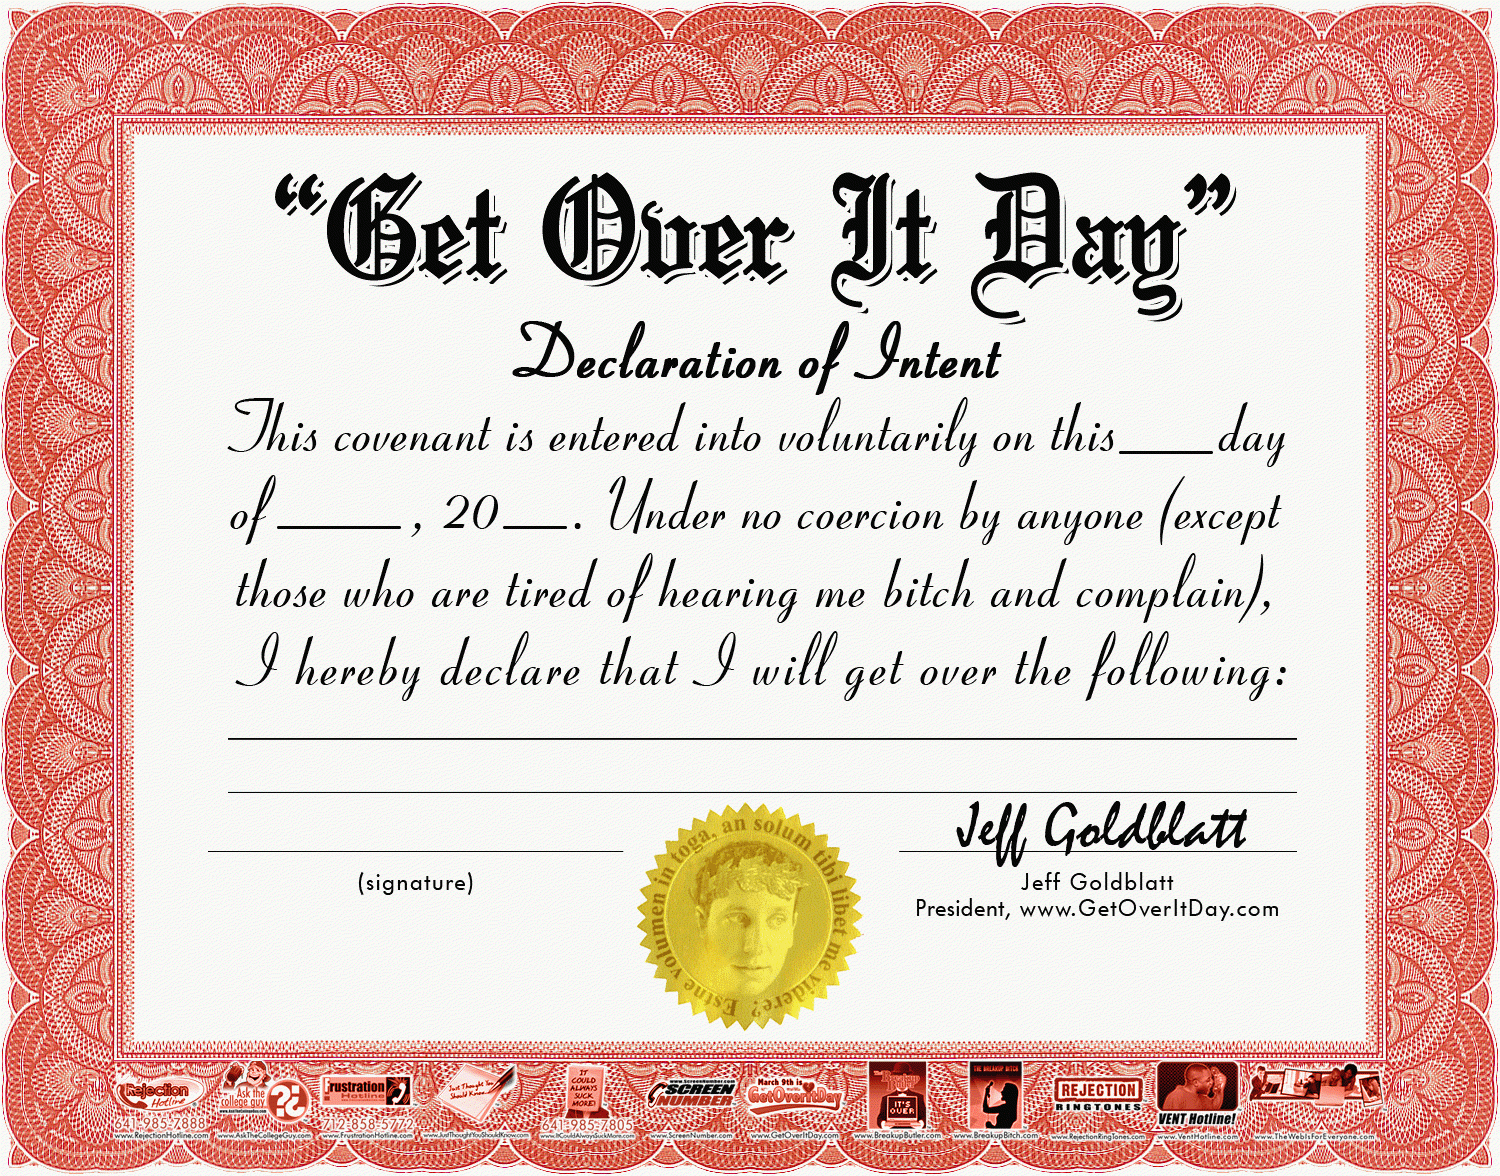 Funny Office Awards Youtube. Silly Certificates Funny Awards Inside Funny Certificate Templates